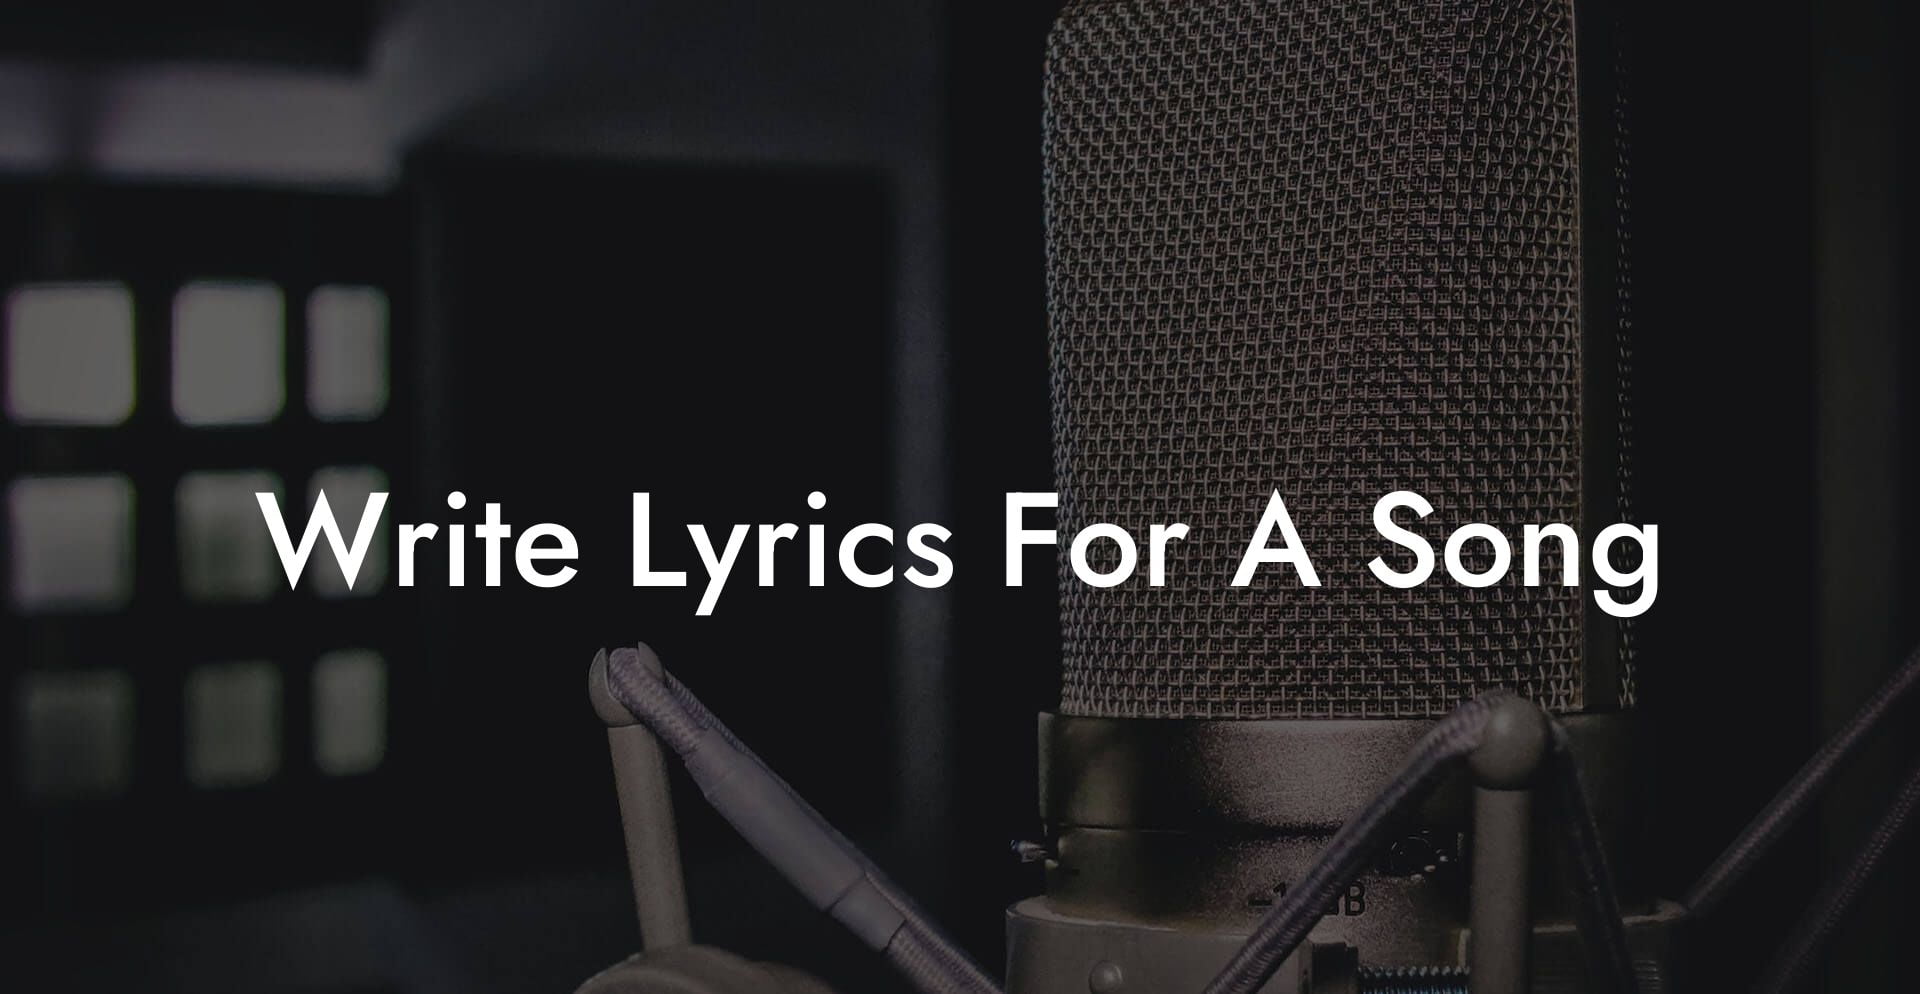 write lyrics for a song lyric assistant